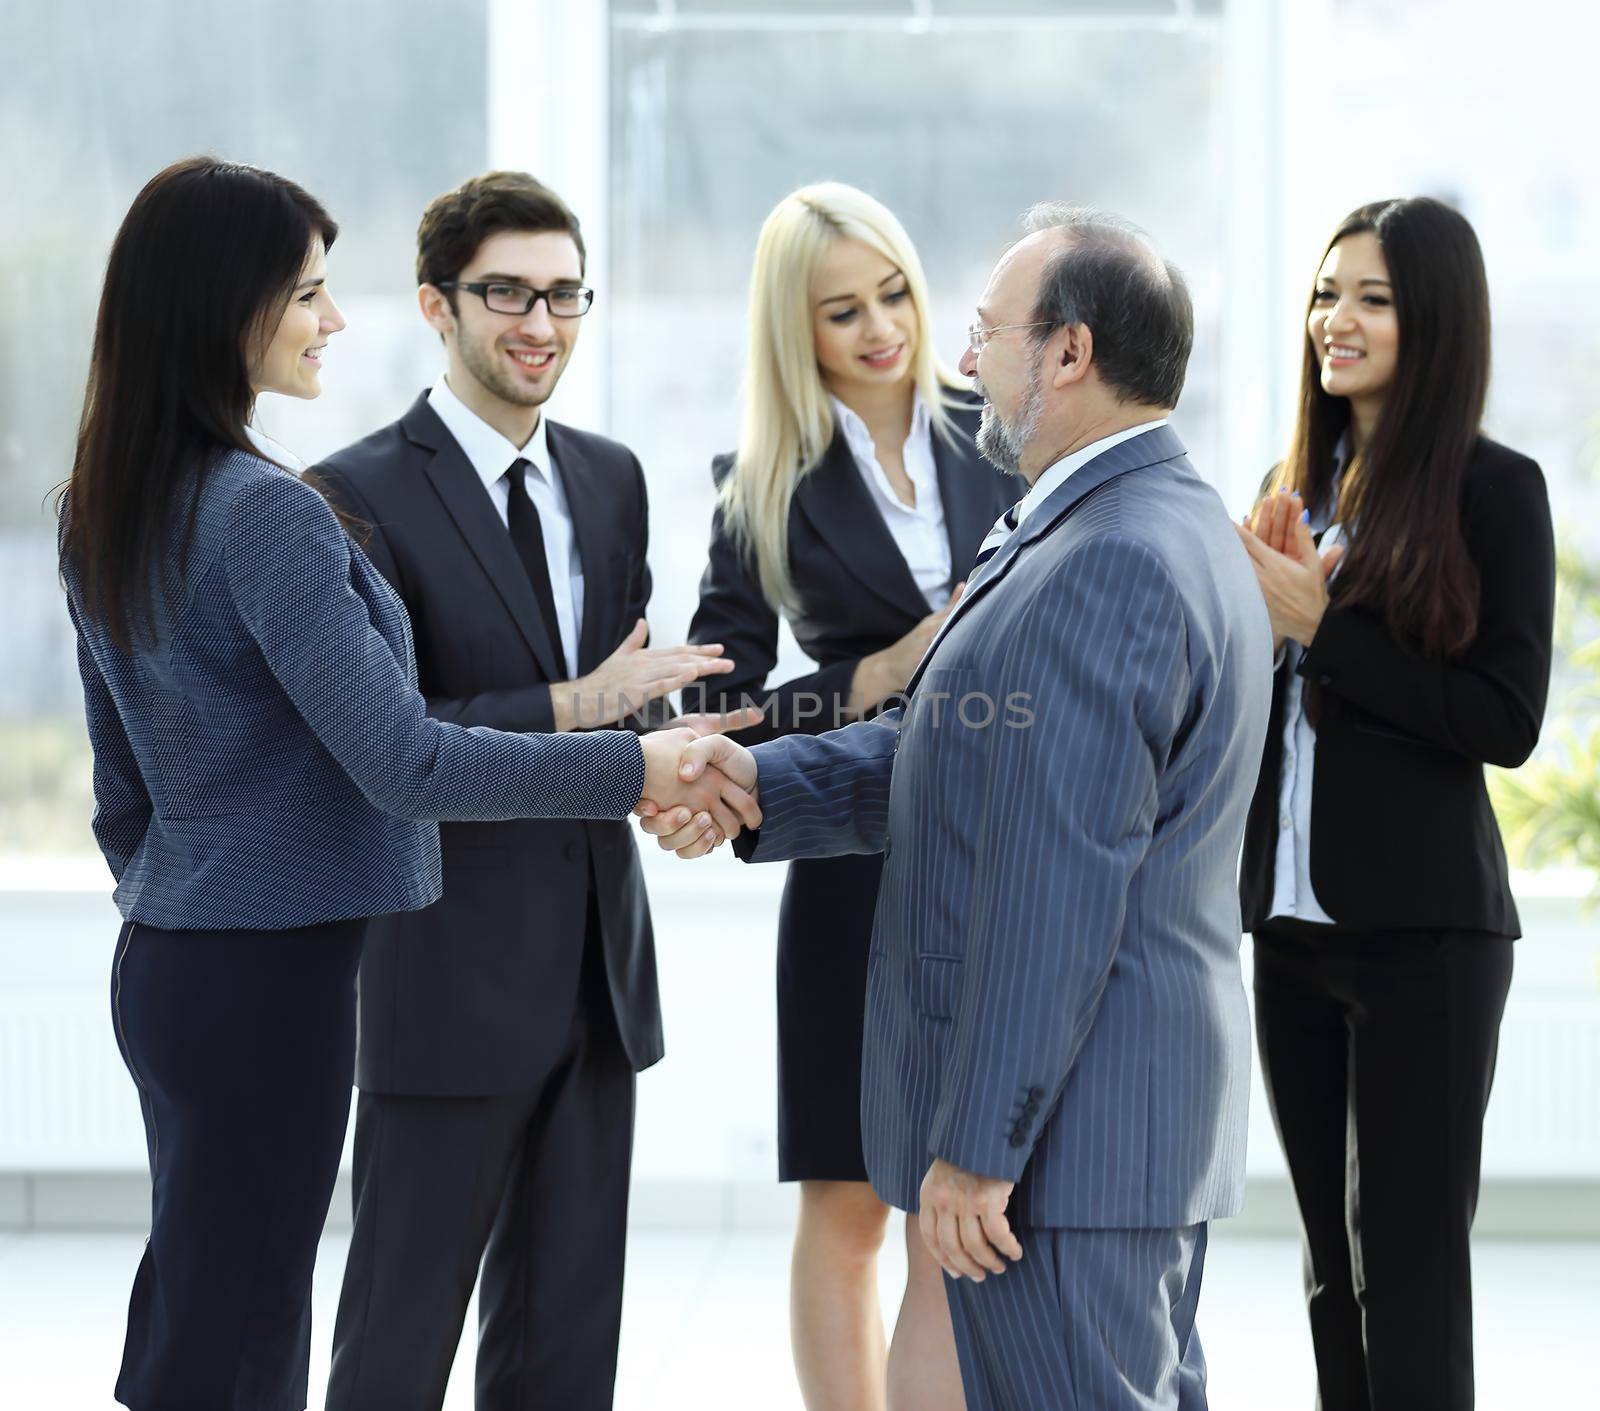 Business handshake and business people concept. Two men shaking hands.concept of partnership